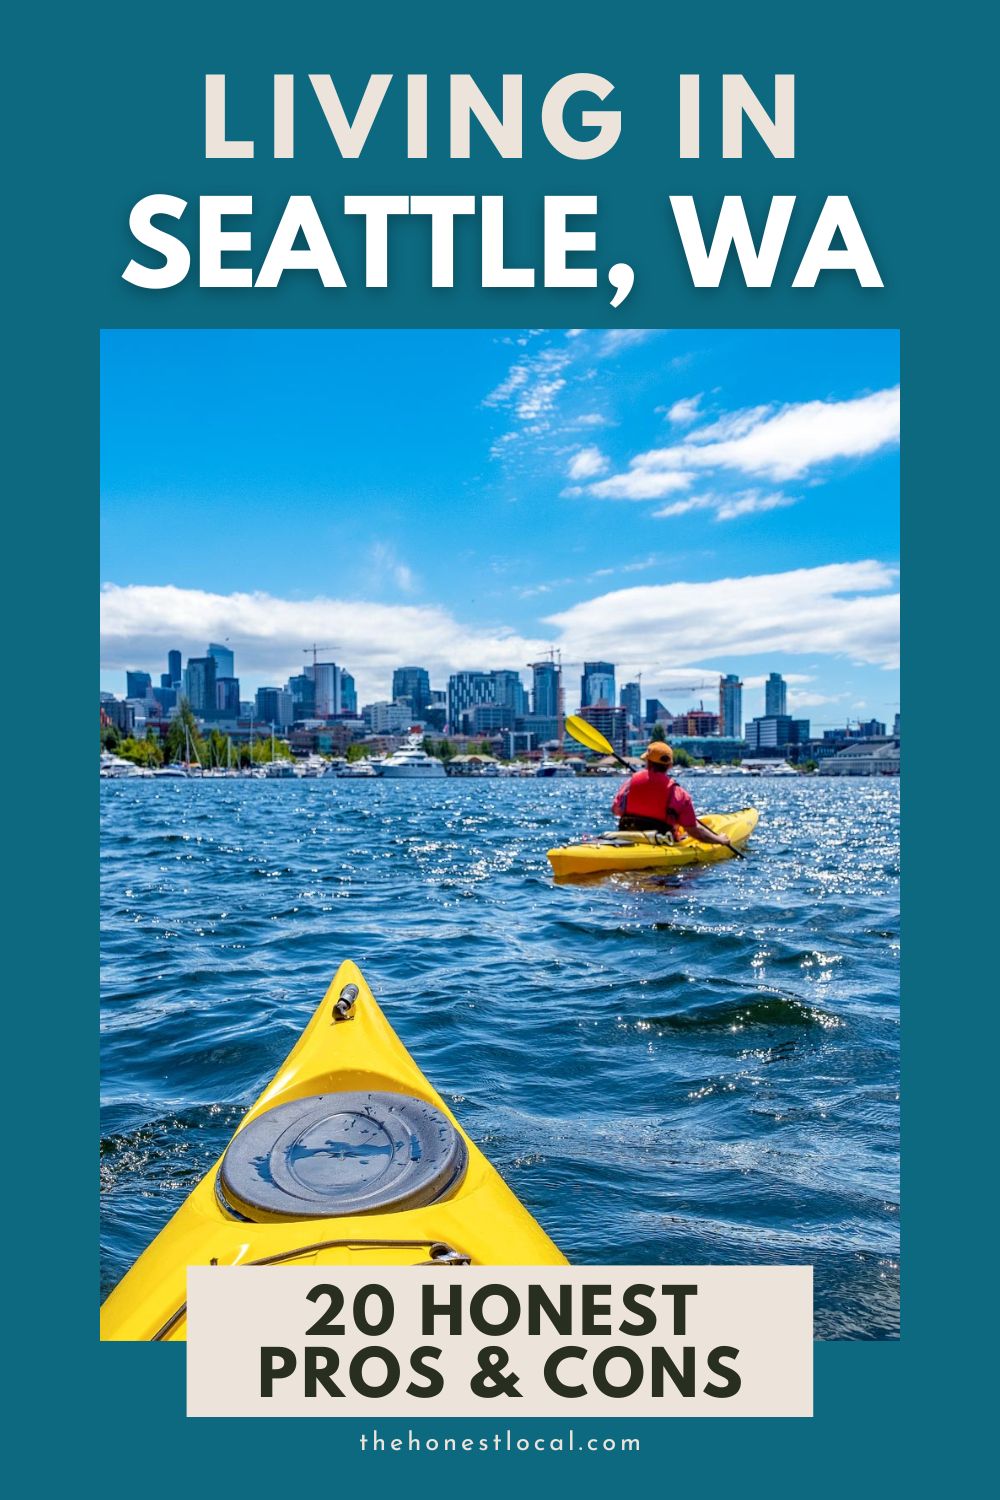 Pros and cons of living in Seattle, Washington